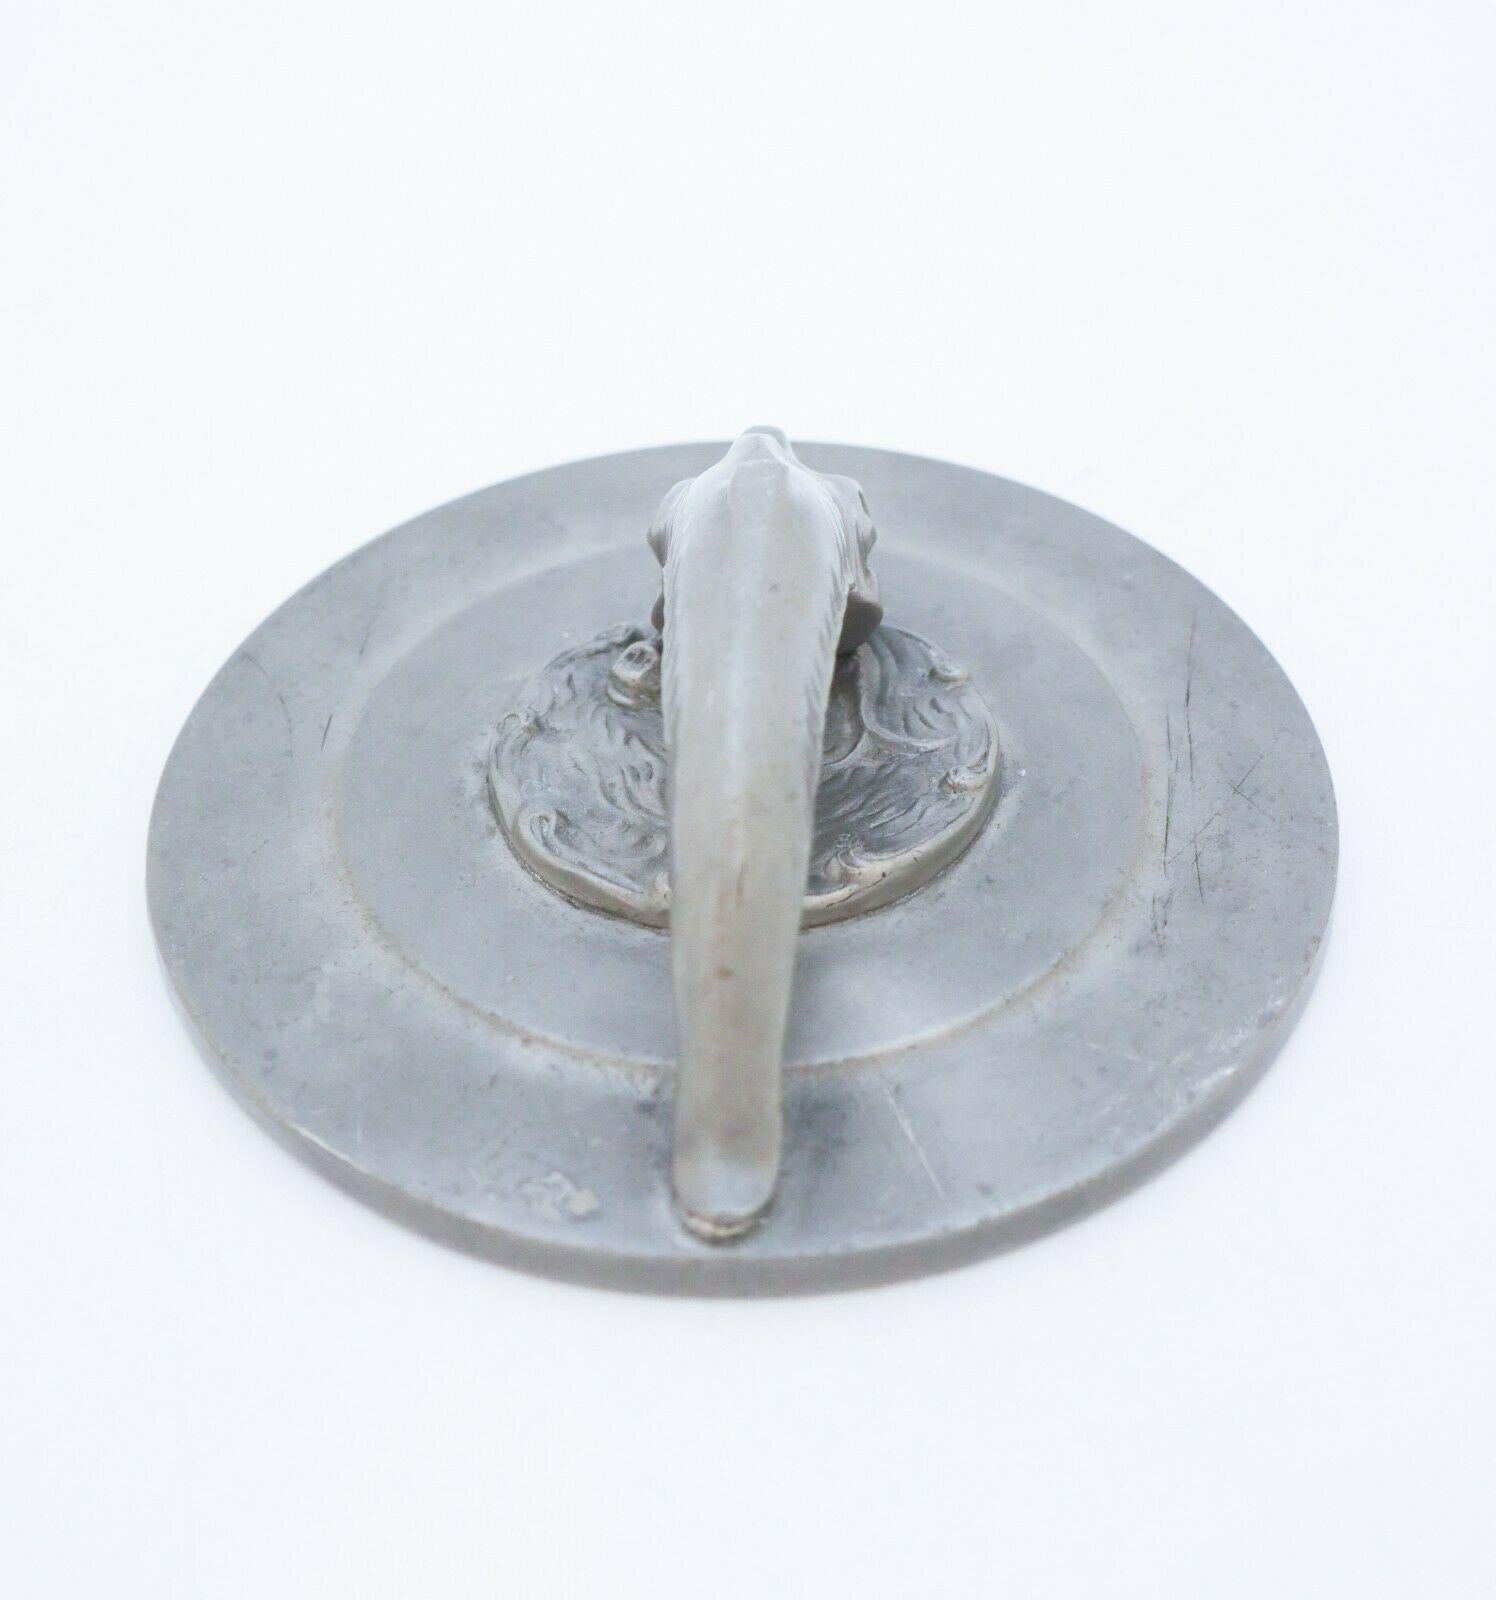 Scandinavian Modern Hand Mirror in Pewter with Decor of Fish, Swedish Art Deco For Sale